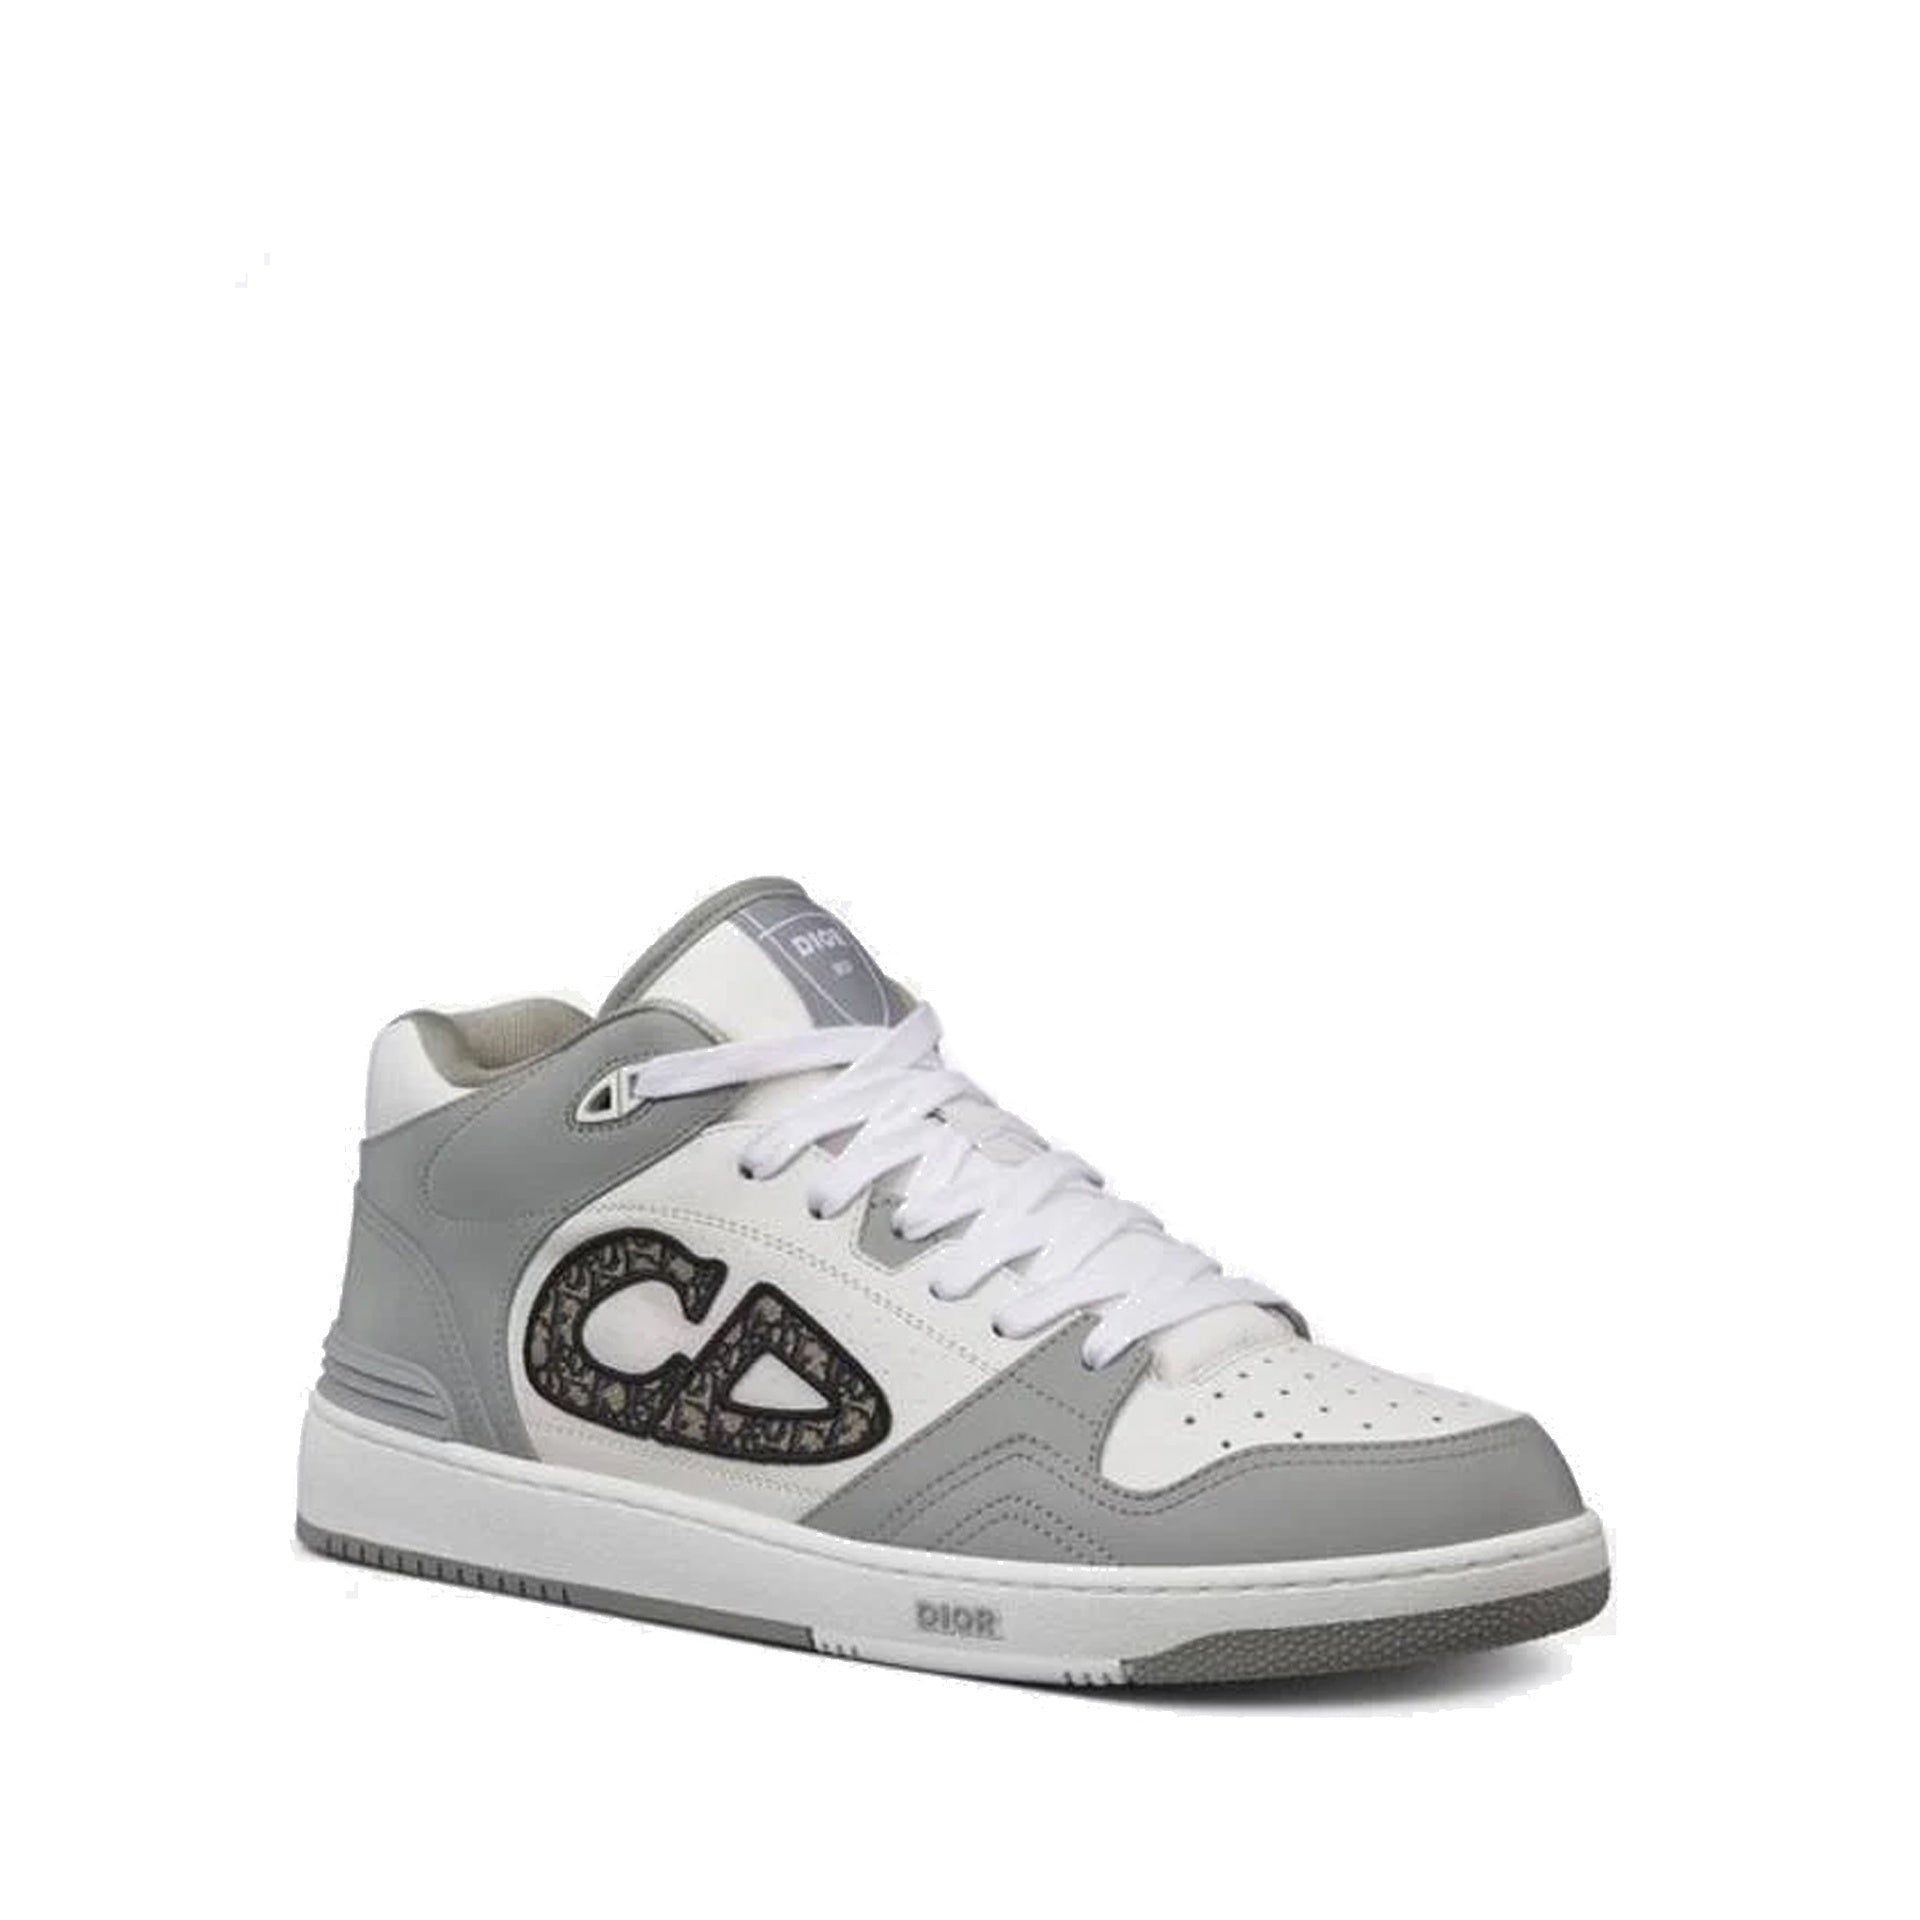 Dior B57 Mid Leather Sneakers